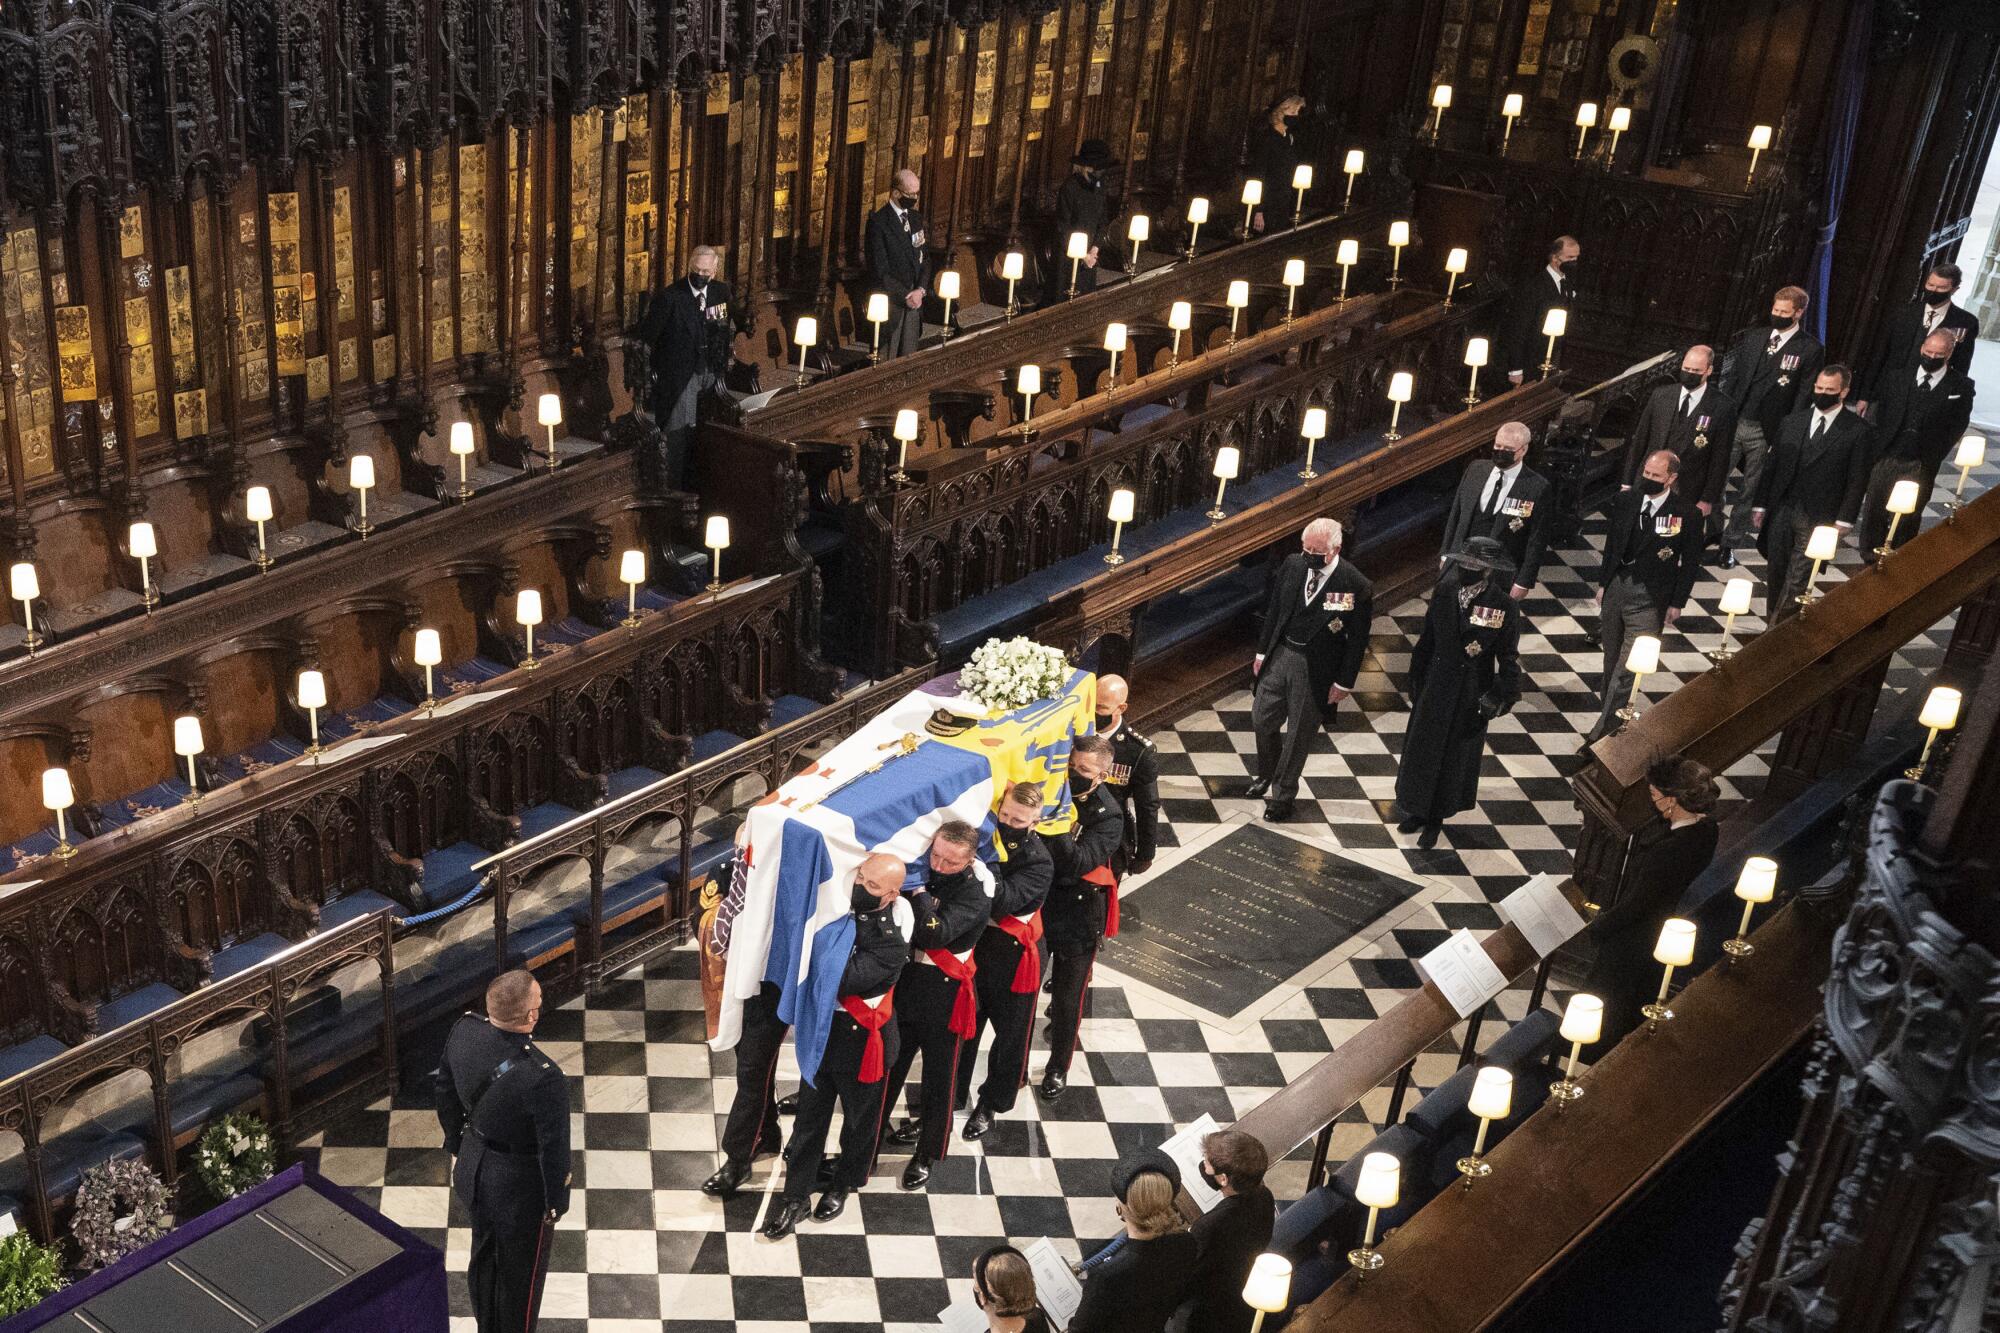 Pallbearers carry the coffin of Prince Philip inside St. George's Chapel.